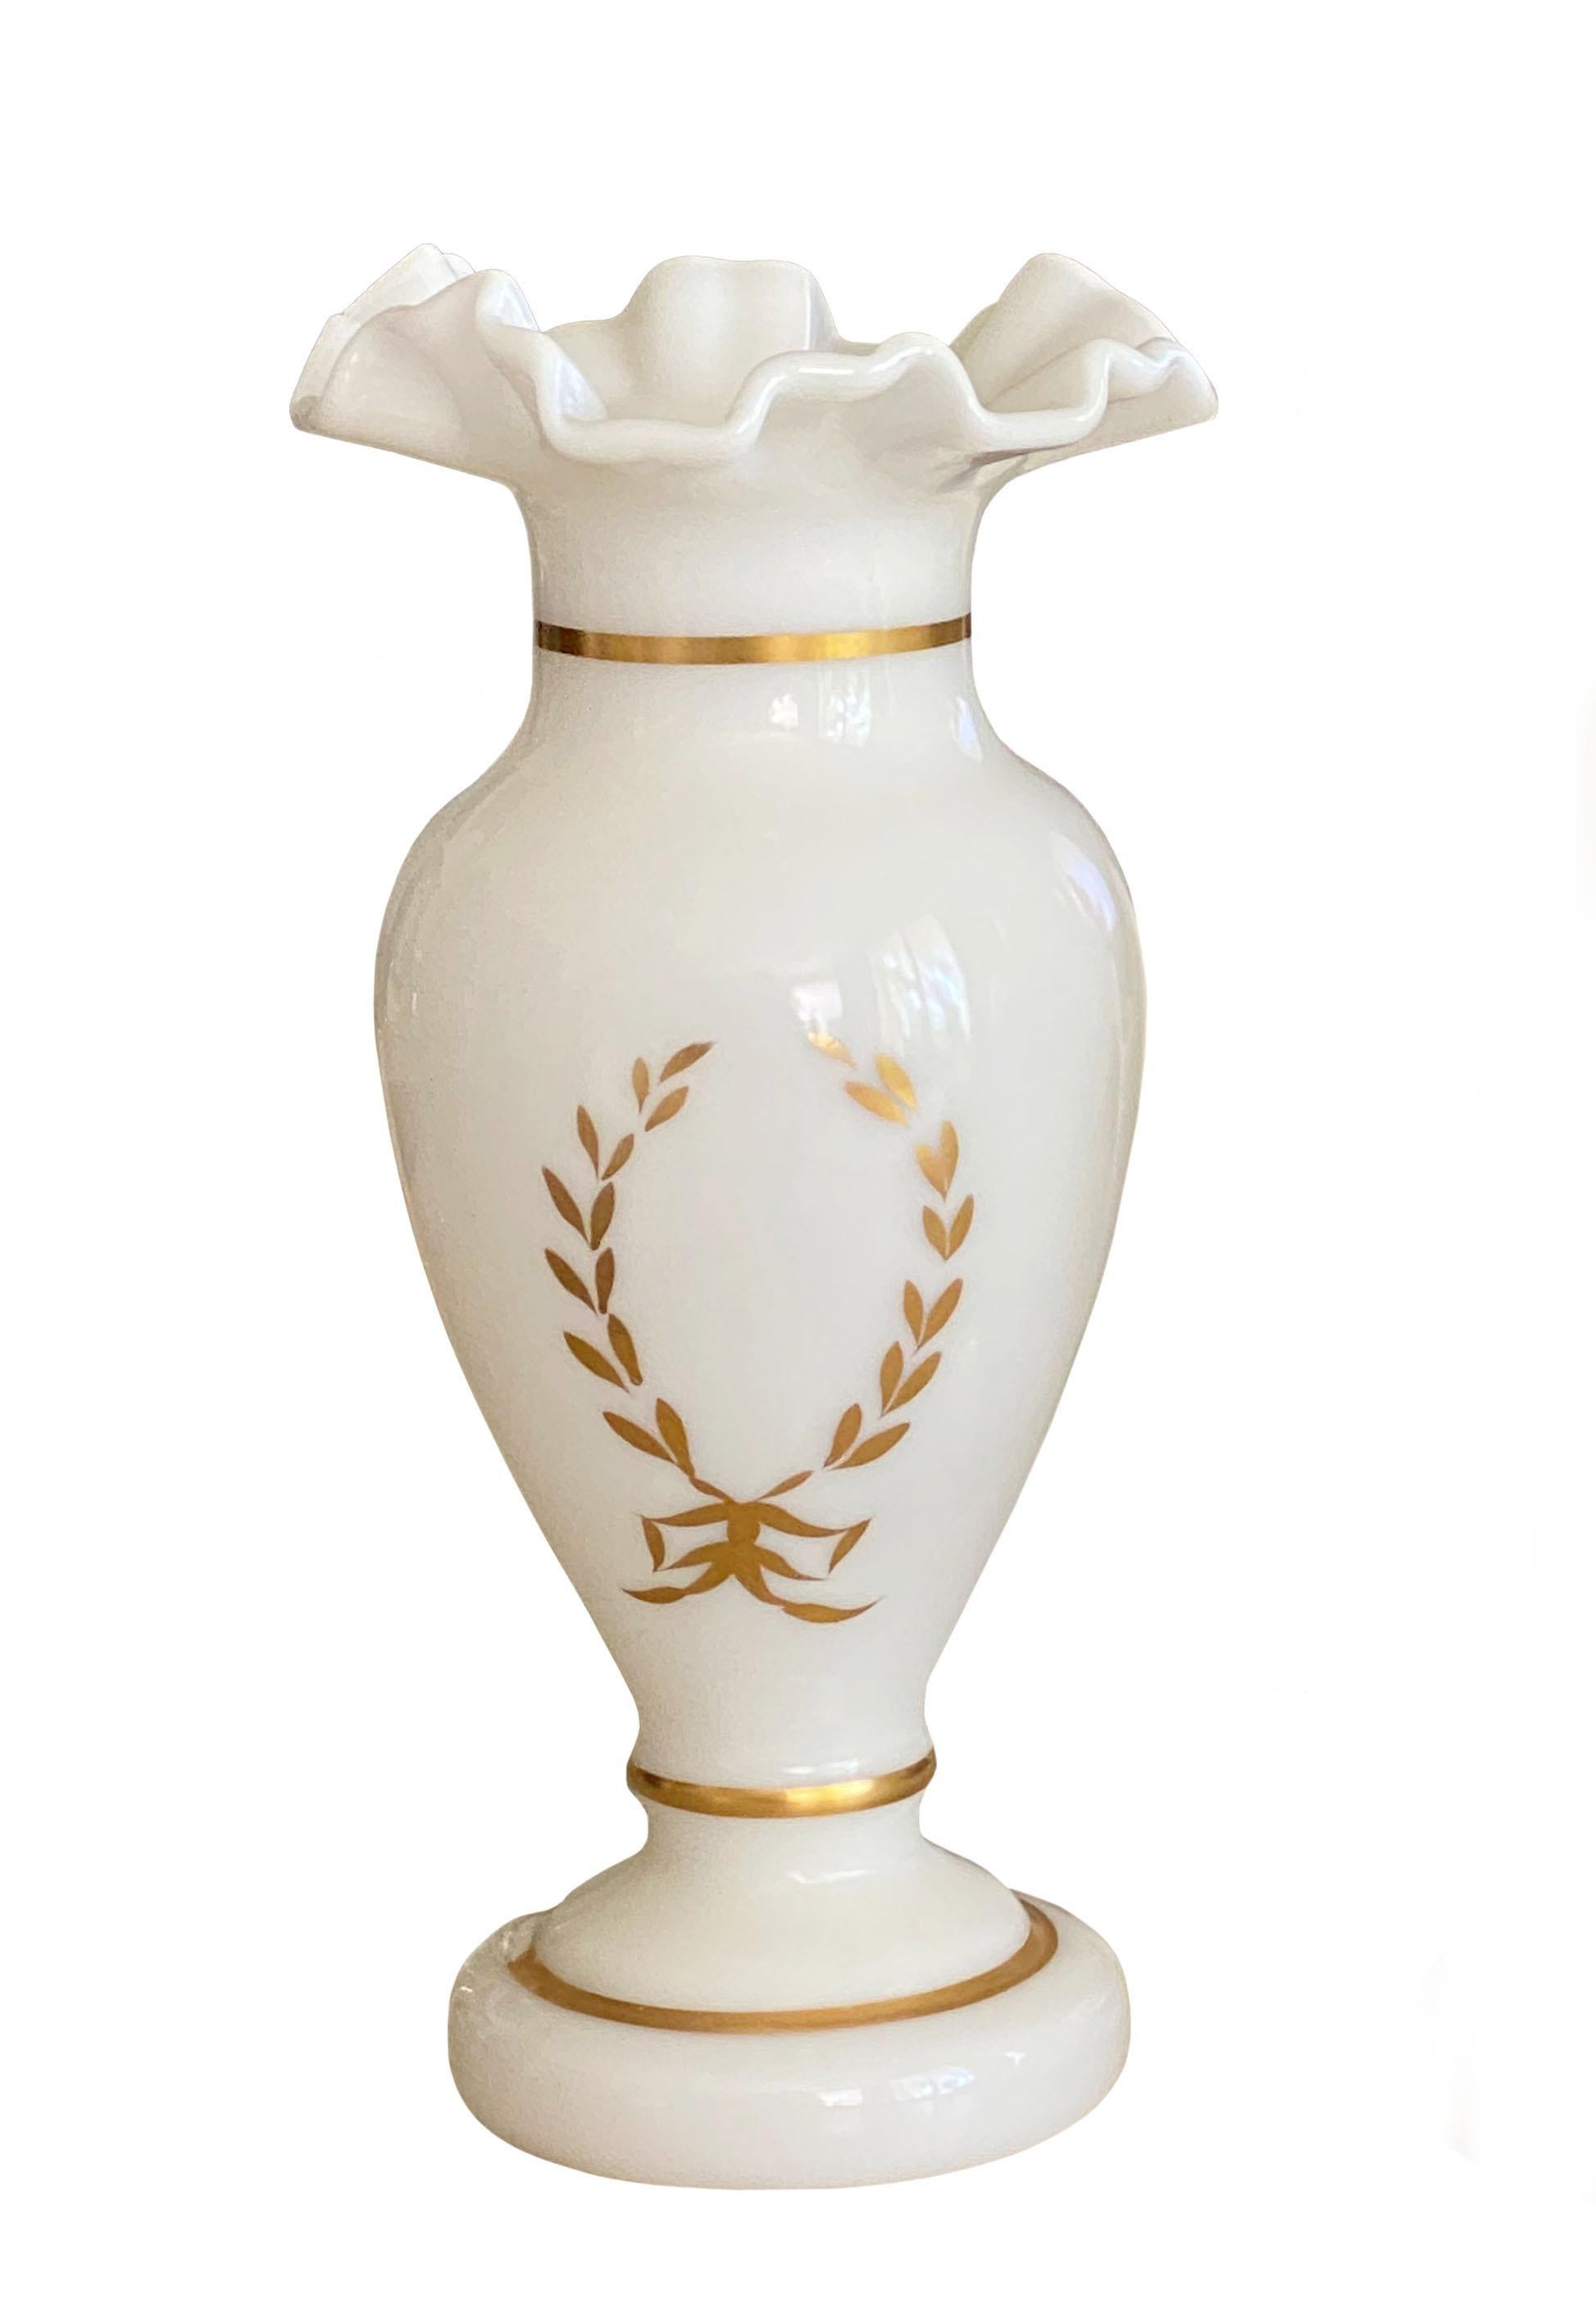 Antique White and Gilt Opaline Vases, a Pair In Good Condition For Sale In Clearwater, FL